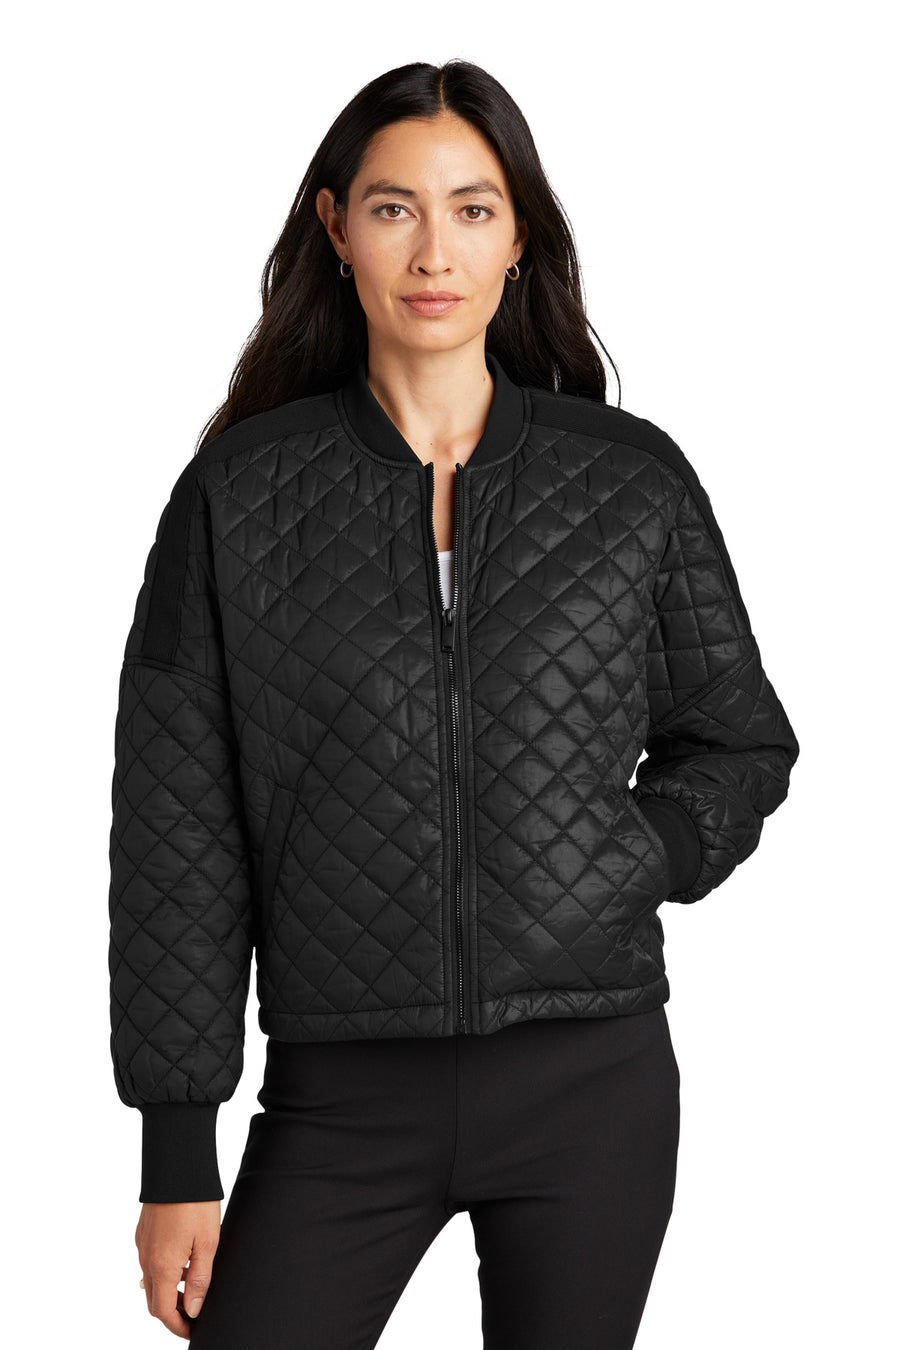 Mercer+Mettle Boxy Quilted Jacket